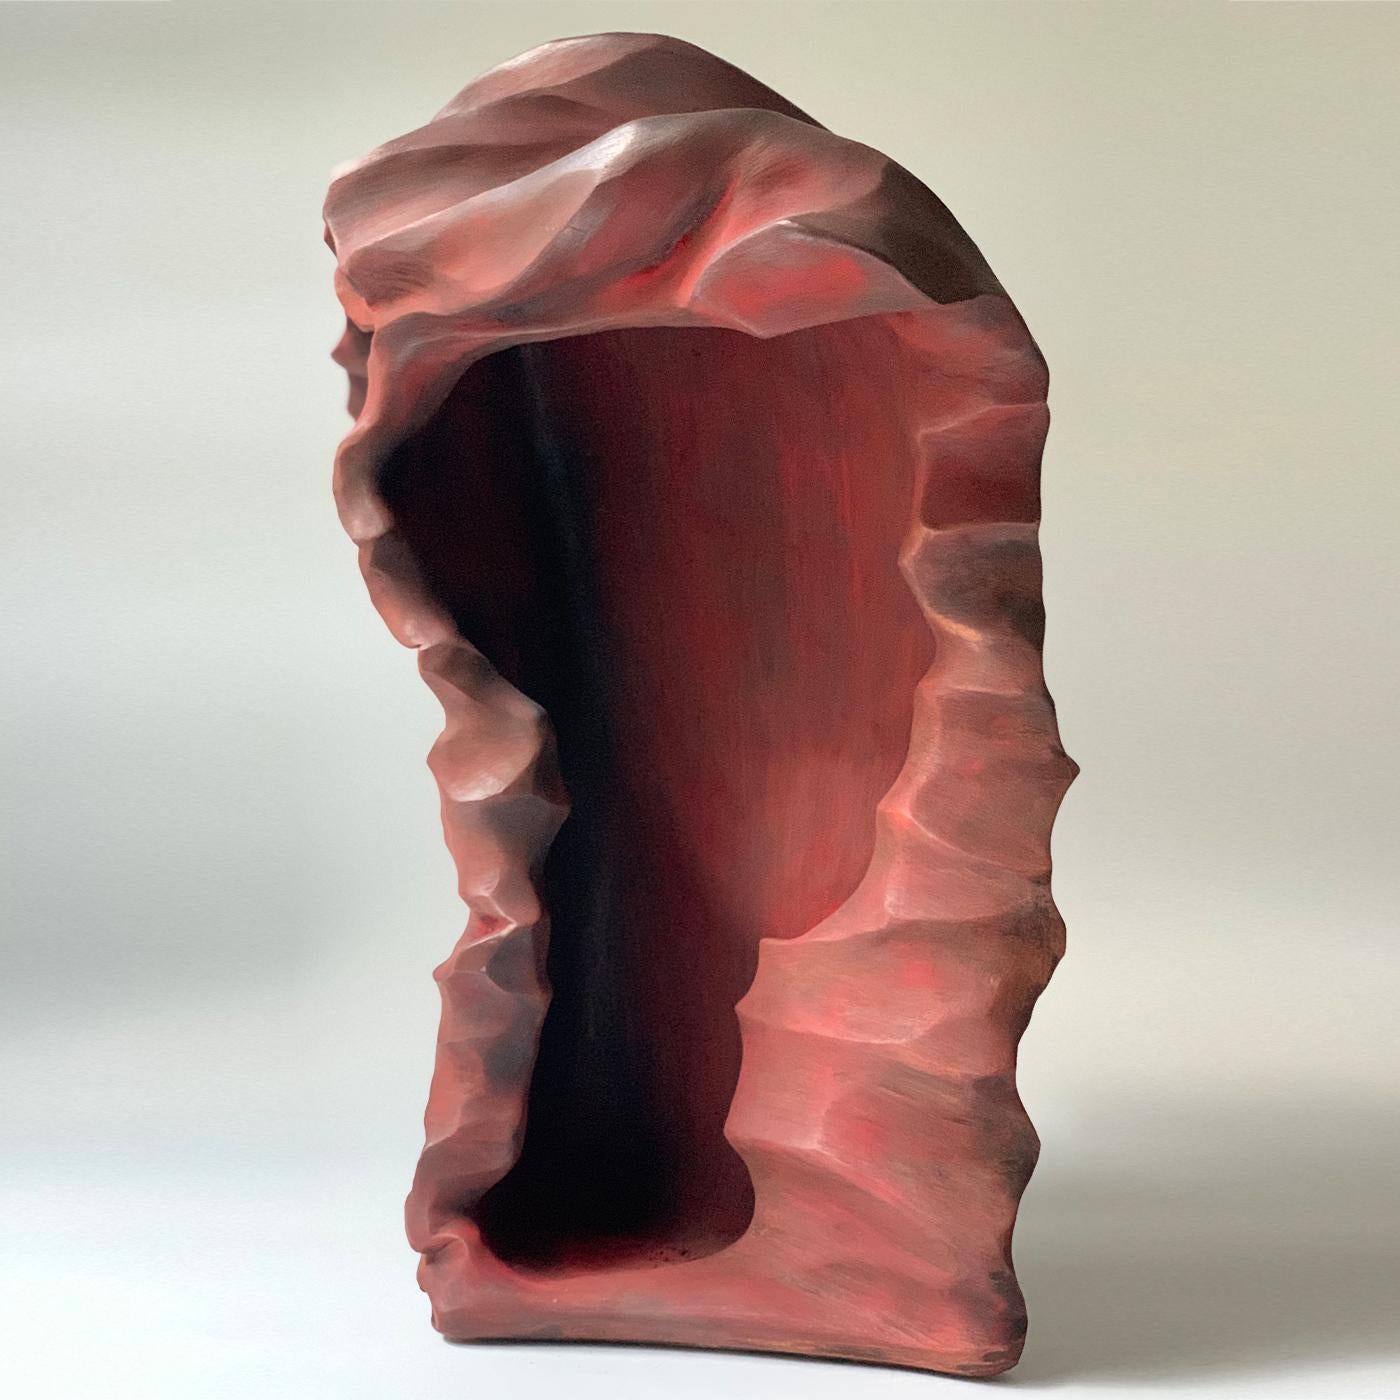 Pleasantly vibrant and sinuous in its seductive movement and pure red pigment coloring its entire shape, this stupendous sculpture can be looked at from three main angles. Handcrafted of ceramic painted in an intense, almost incandescent shade, it